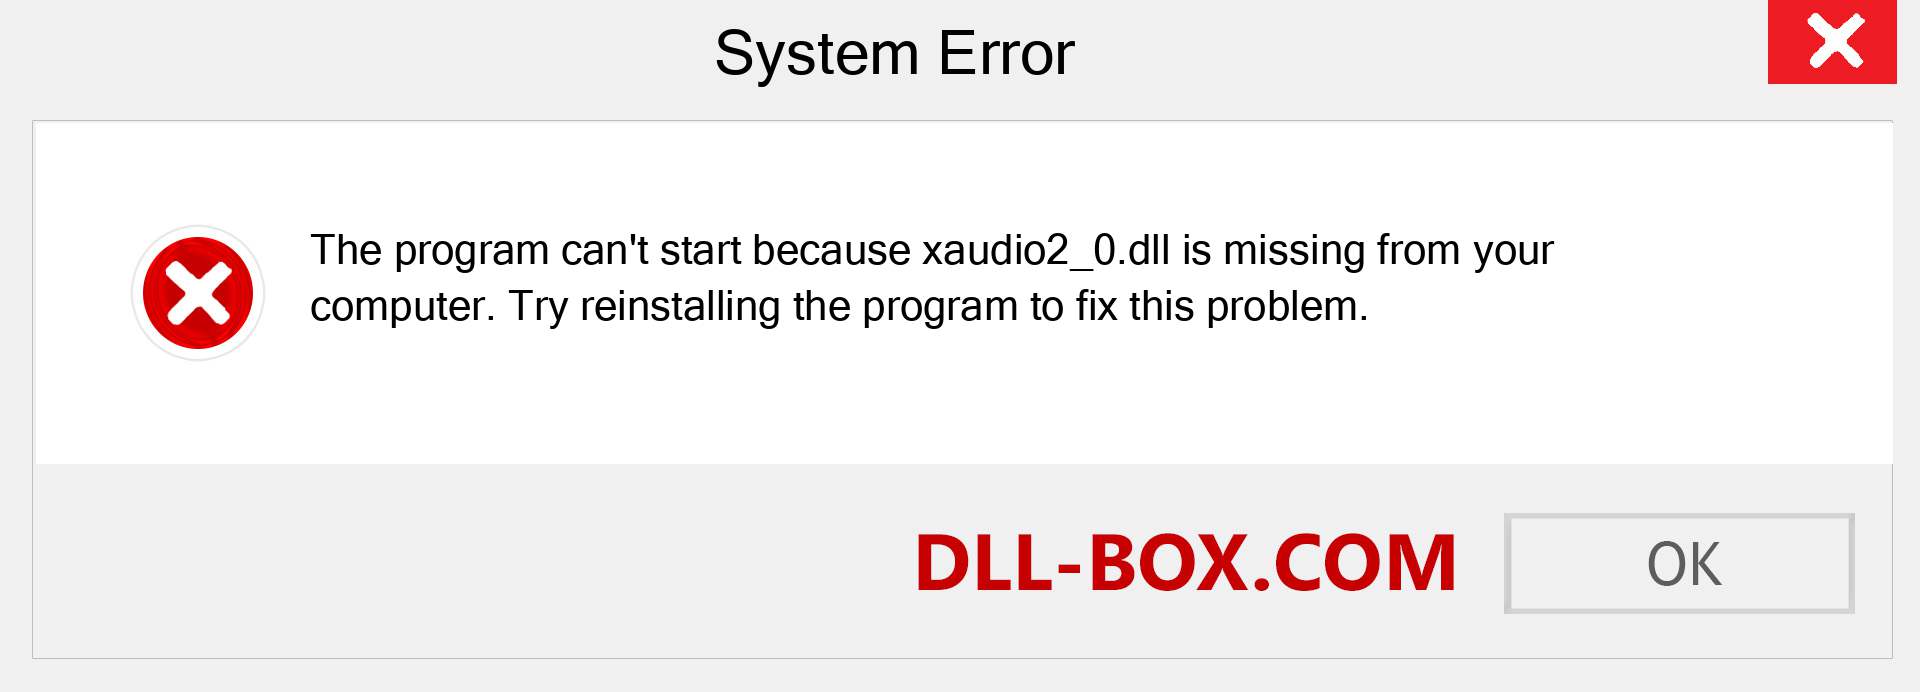  xaudio2_0.dll file is missing?. Download for Windows 7, 8, 10 - Fix  xaudio2_0 dll Missing Error on Windows, photos, images